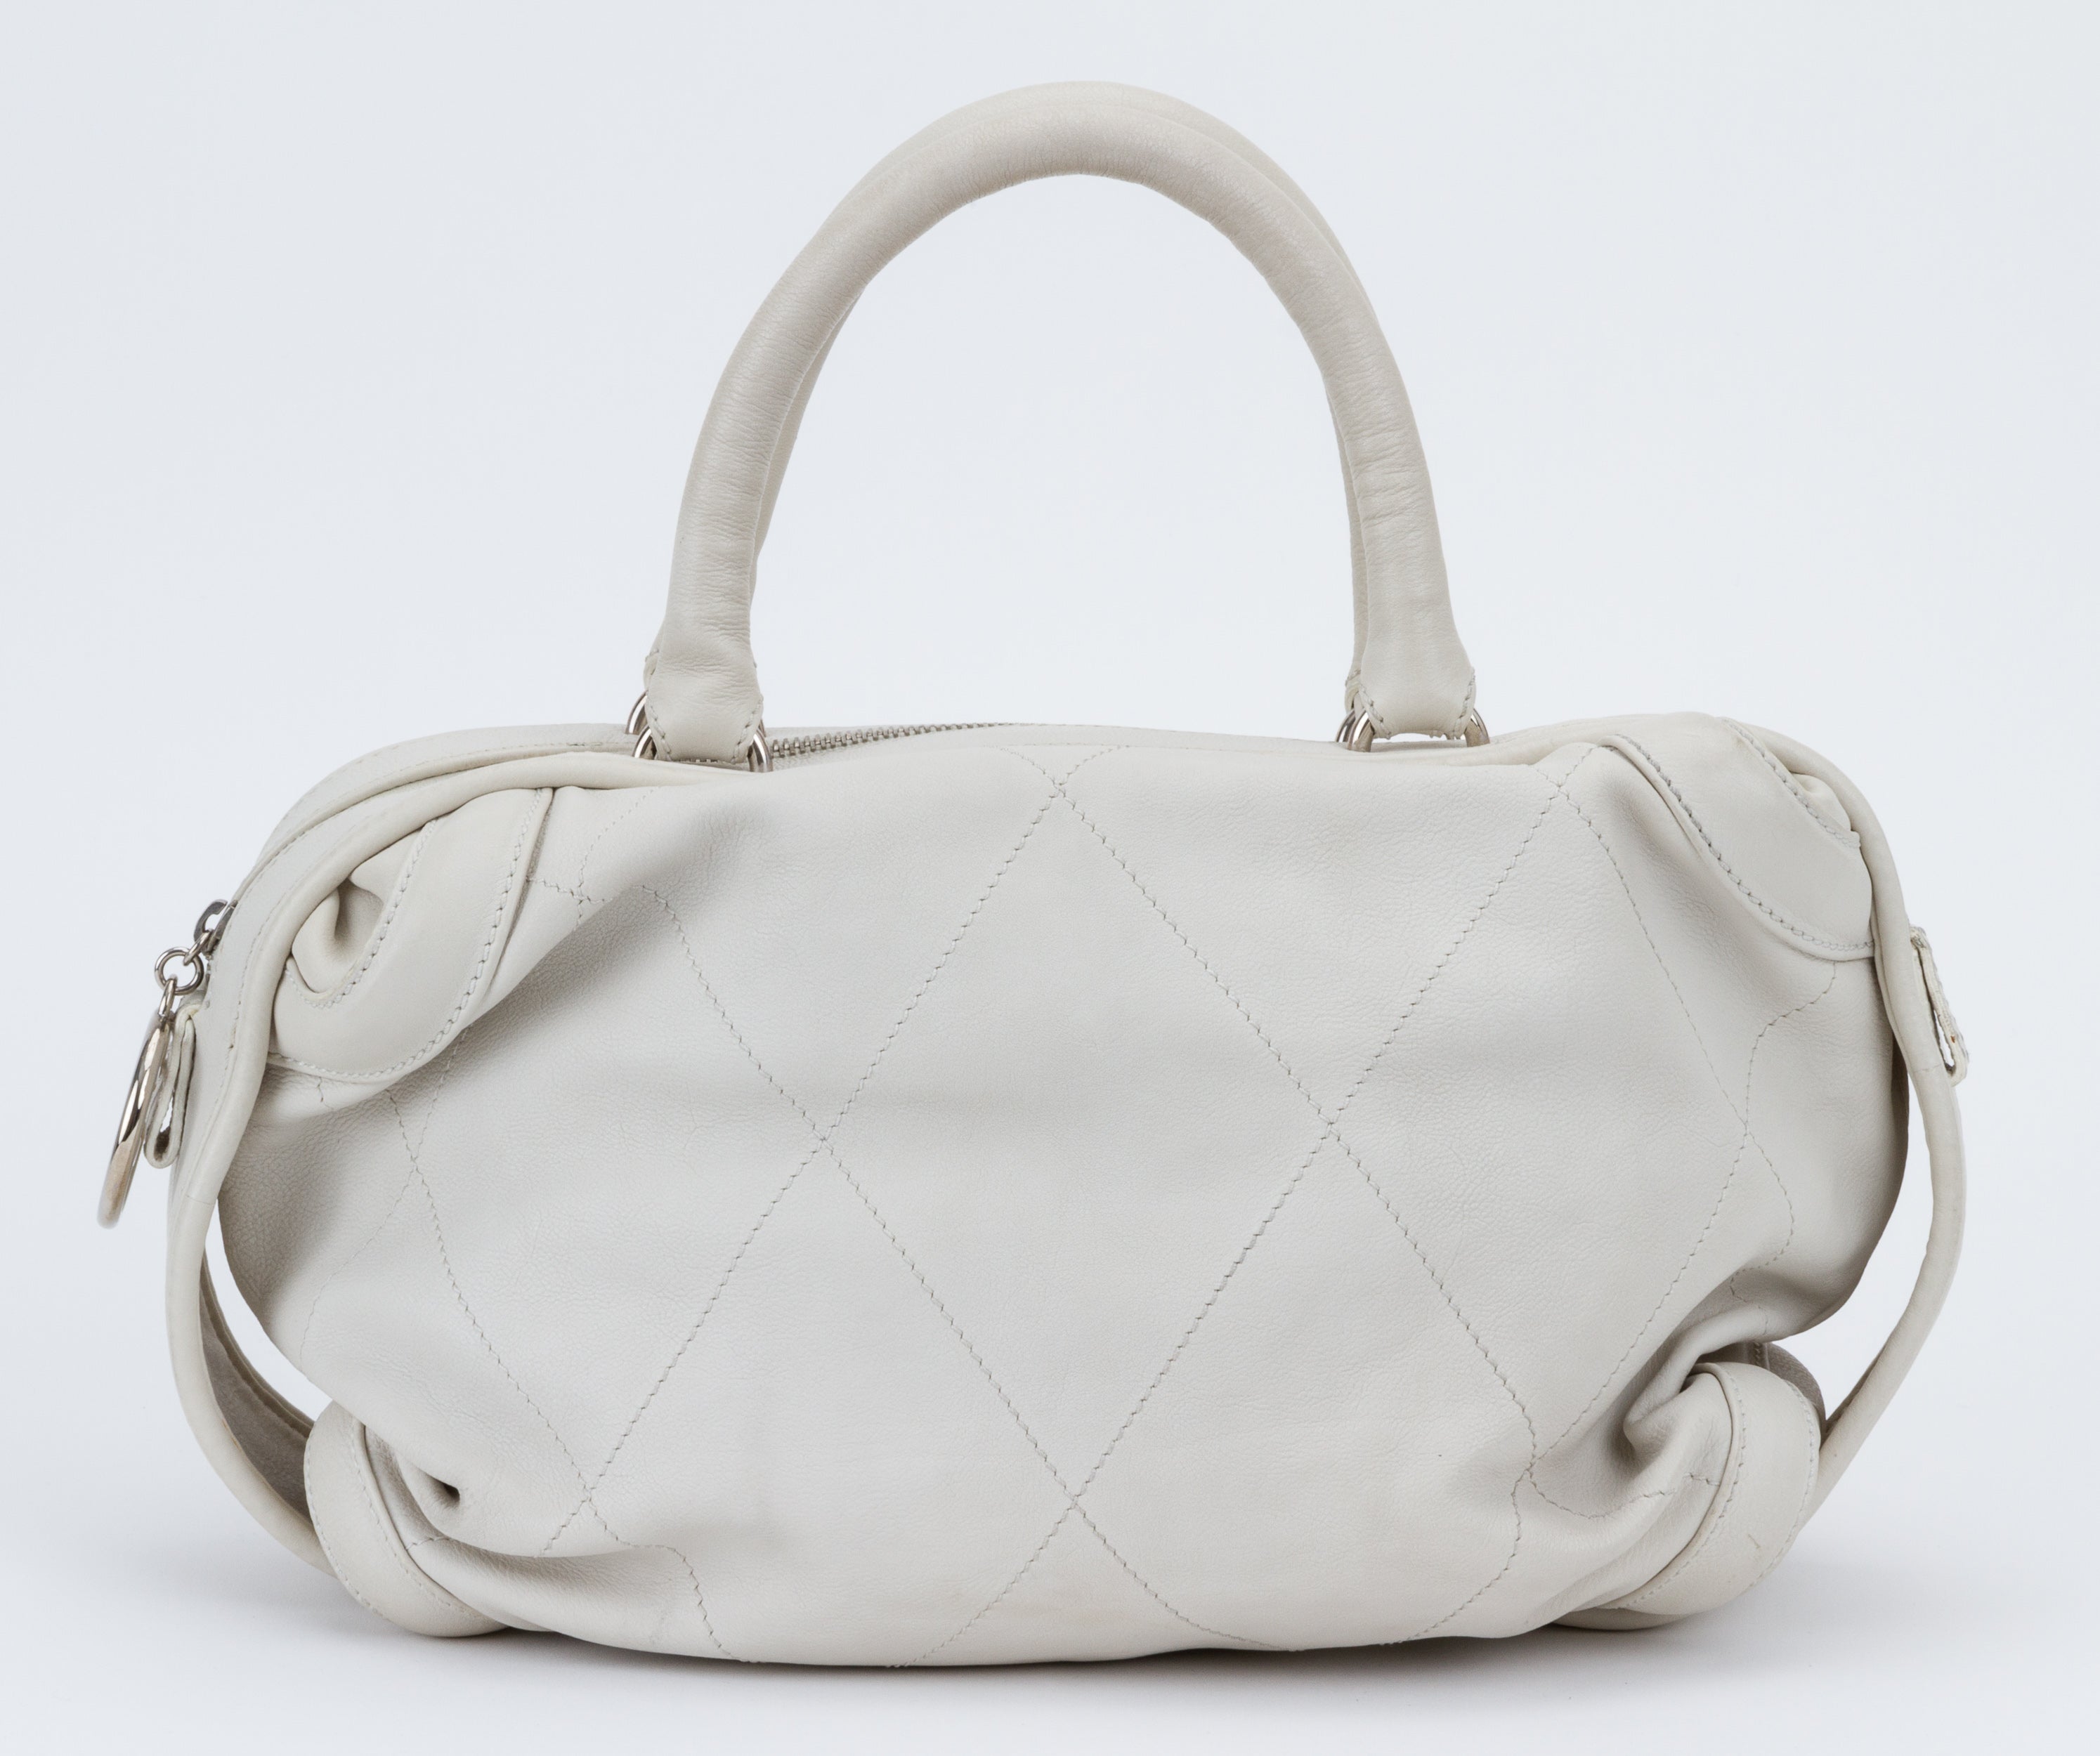 Chanel Ice White Leather Bowler Bag - Vintage Lux